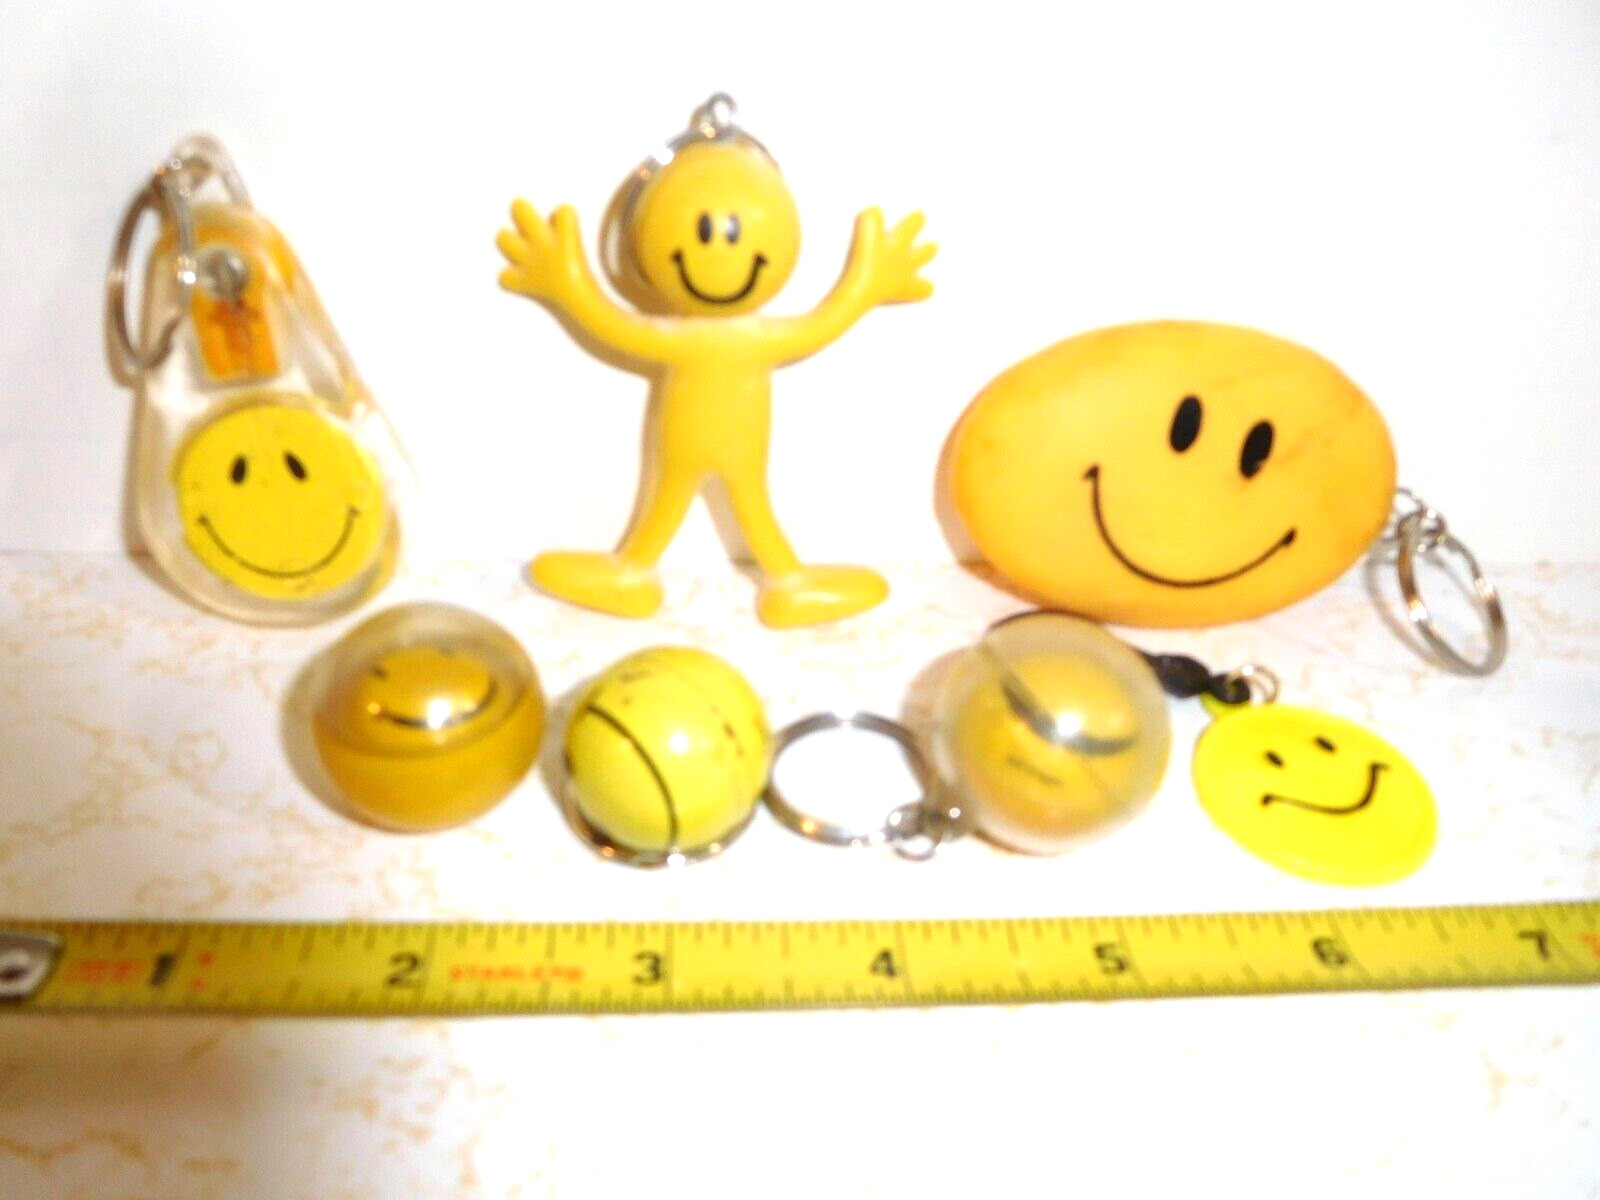 7 Vintage Round Yellow Smiley Face & Bendy Man Key Chains